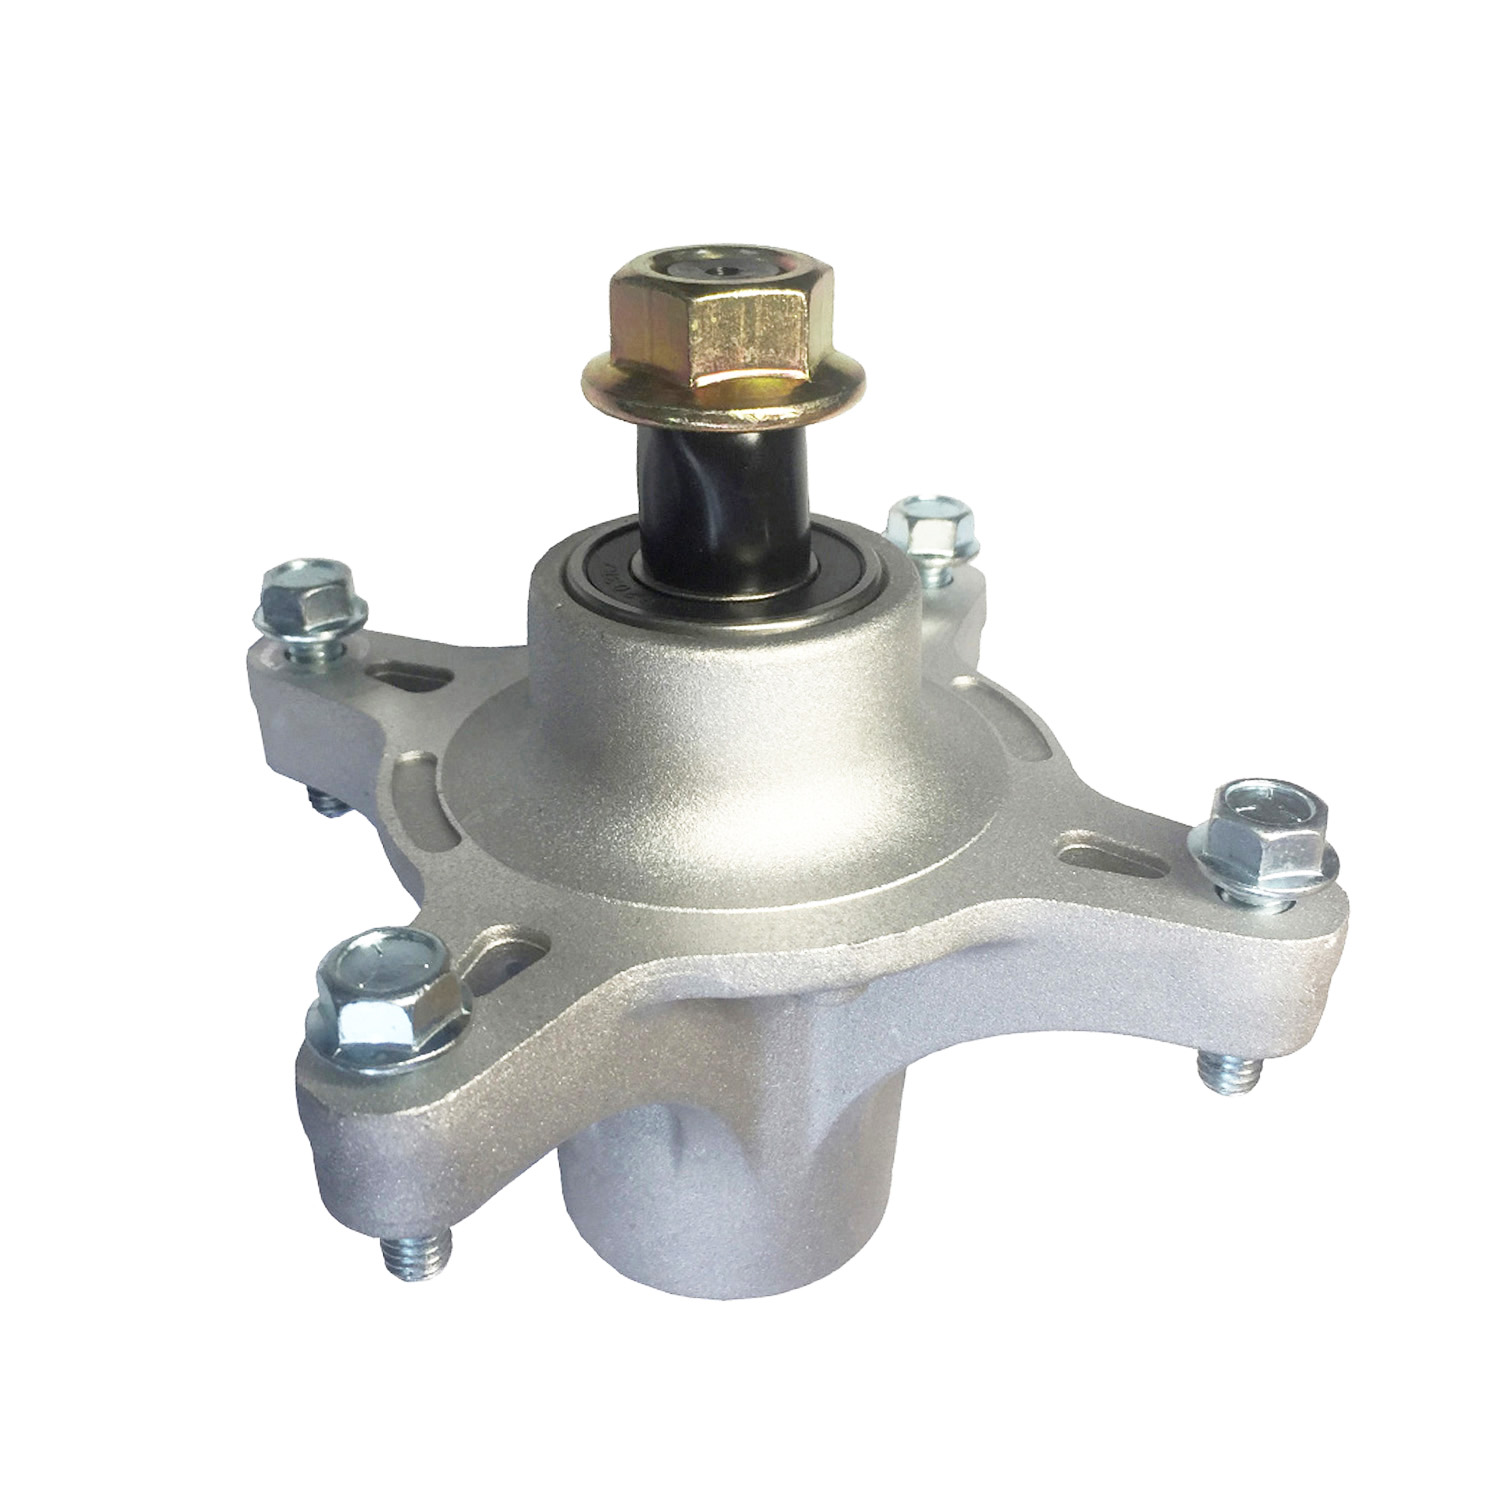 Mower Spindle assembly for Exmark: 117-7268, 117-7439, Toro 121-0751, 117-7267, 117-7268, 117-7439